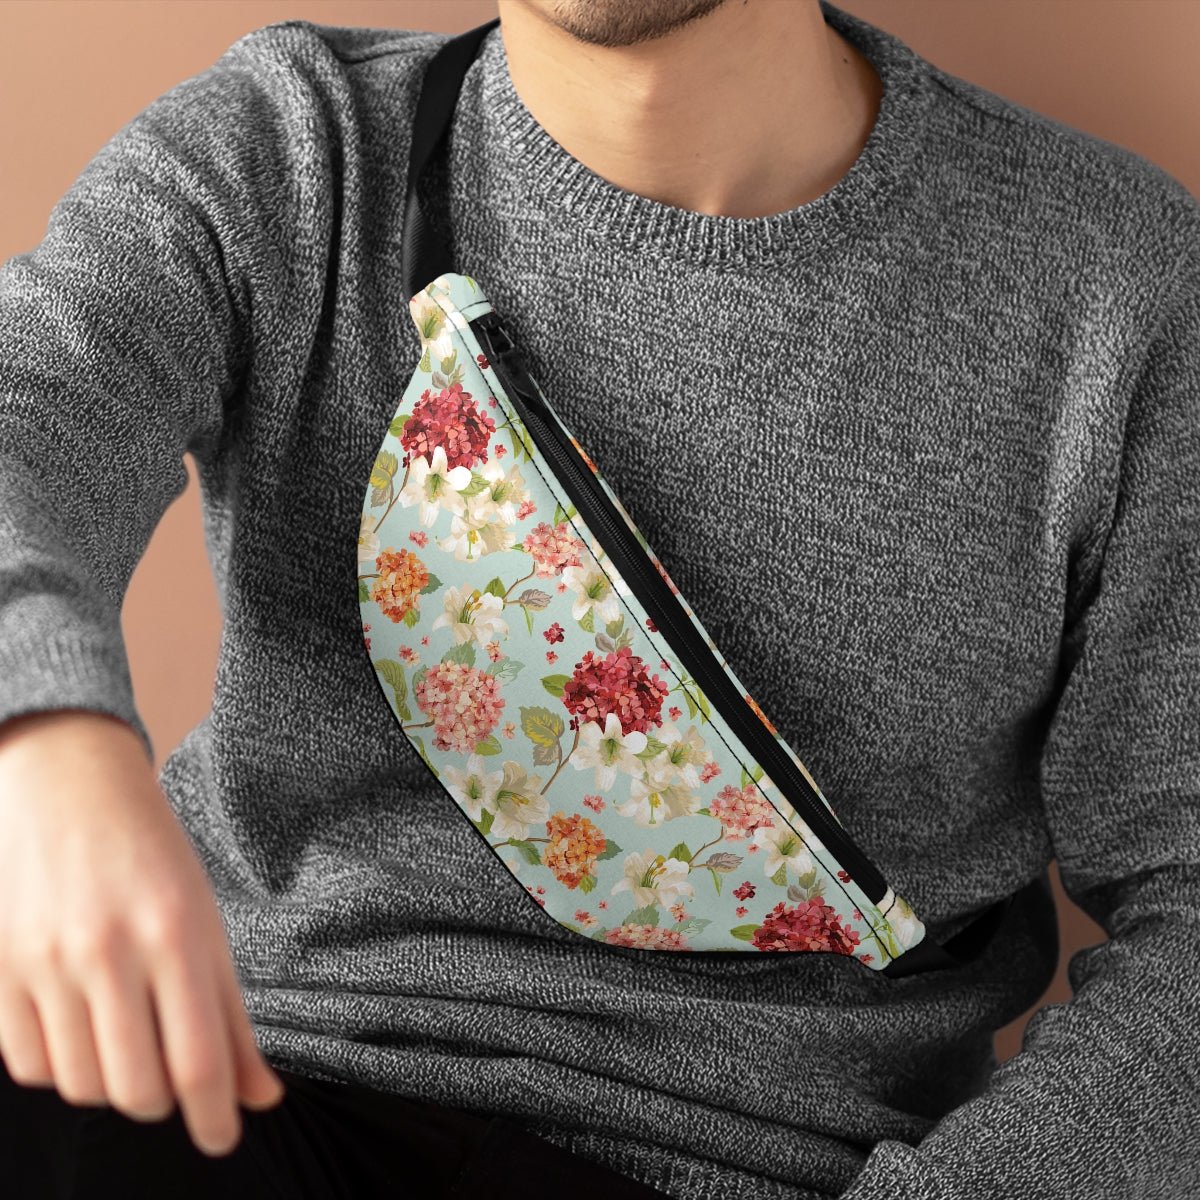 Autumn Hortensia and Lily Flowers Fanny Pack - Puffin Lime